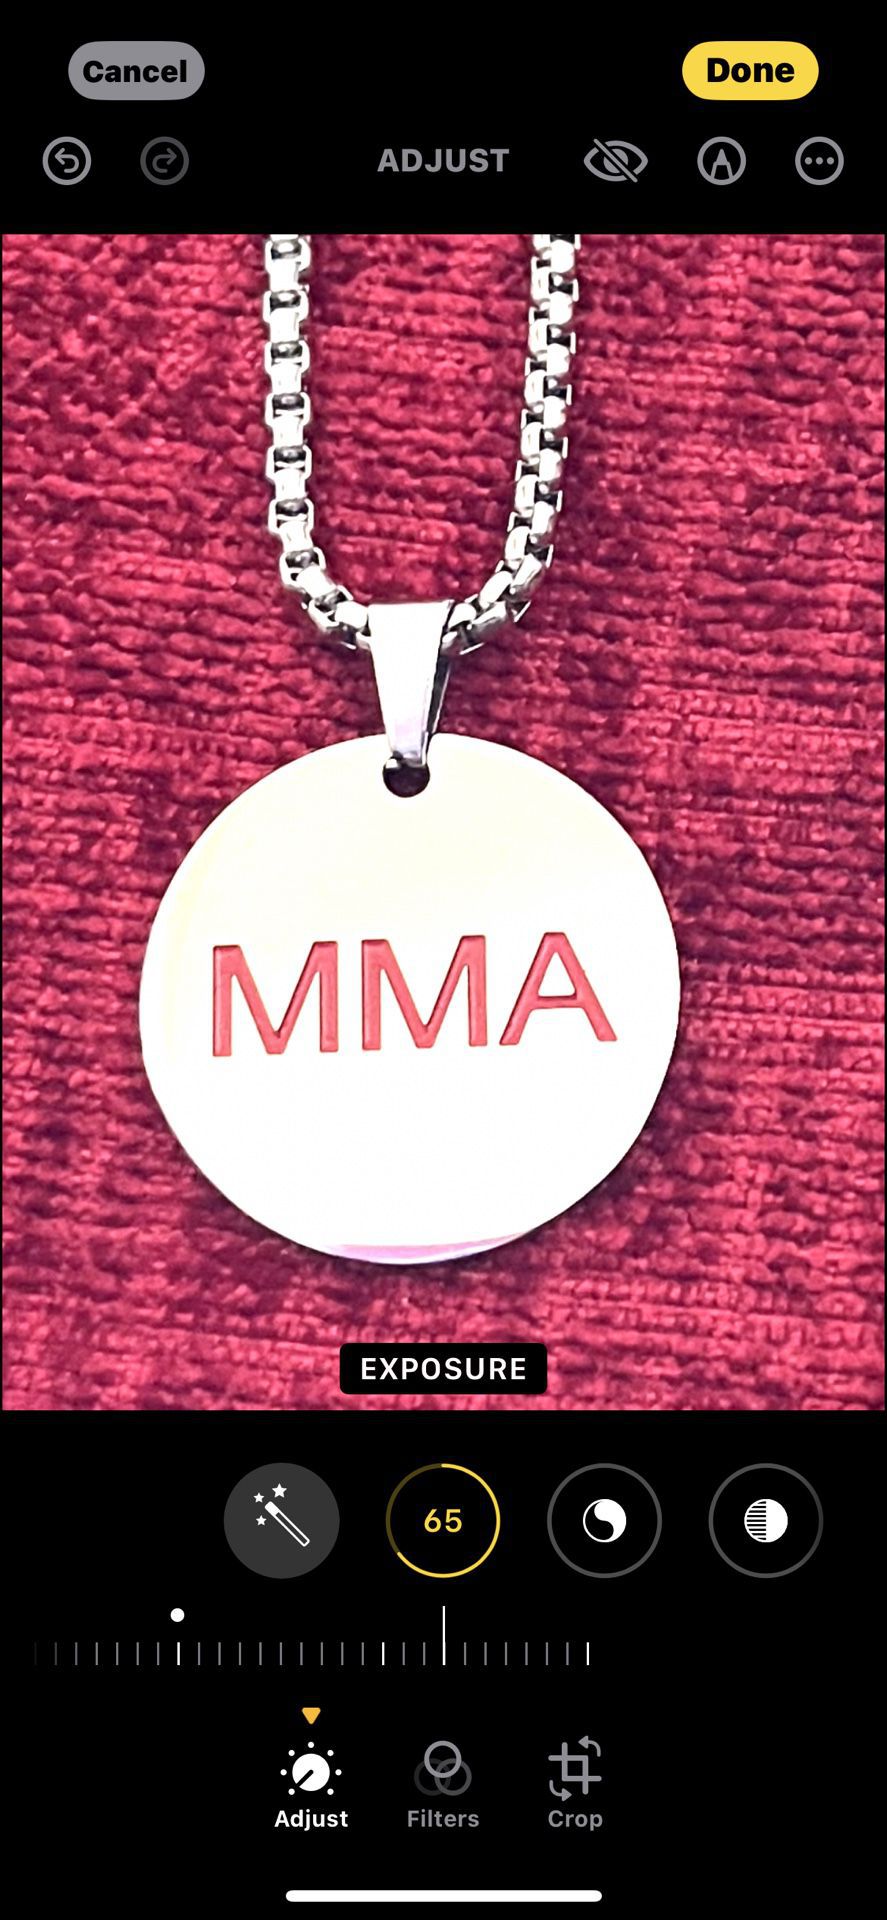 Mixed Martial Arts (MMA)Pendant and Chain. Really Nice!